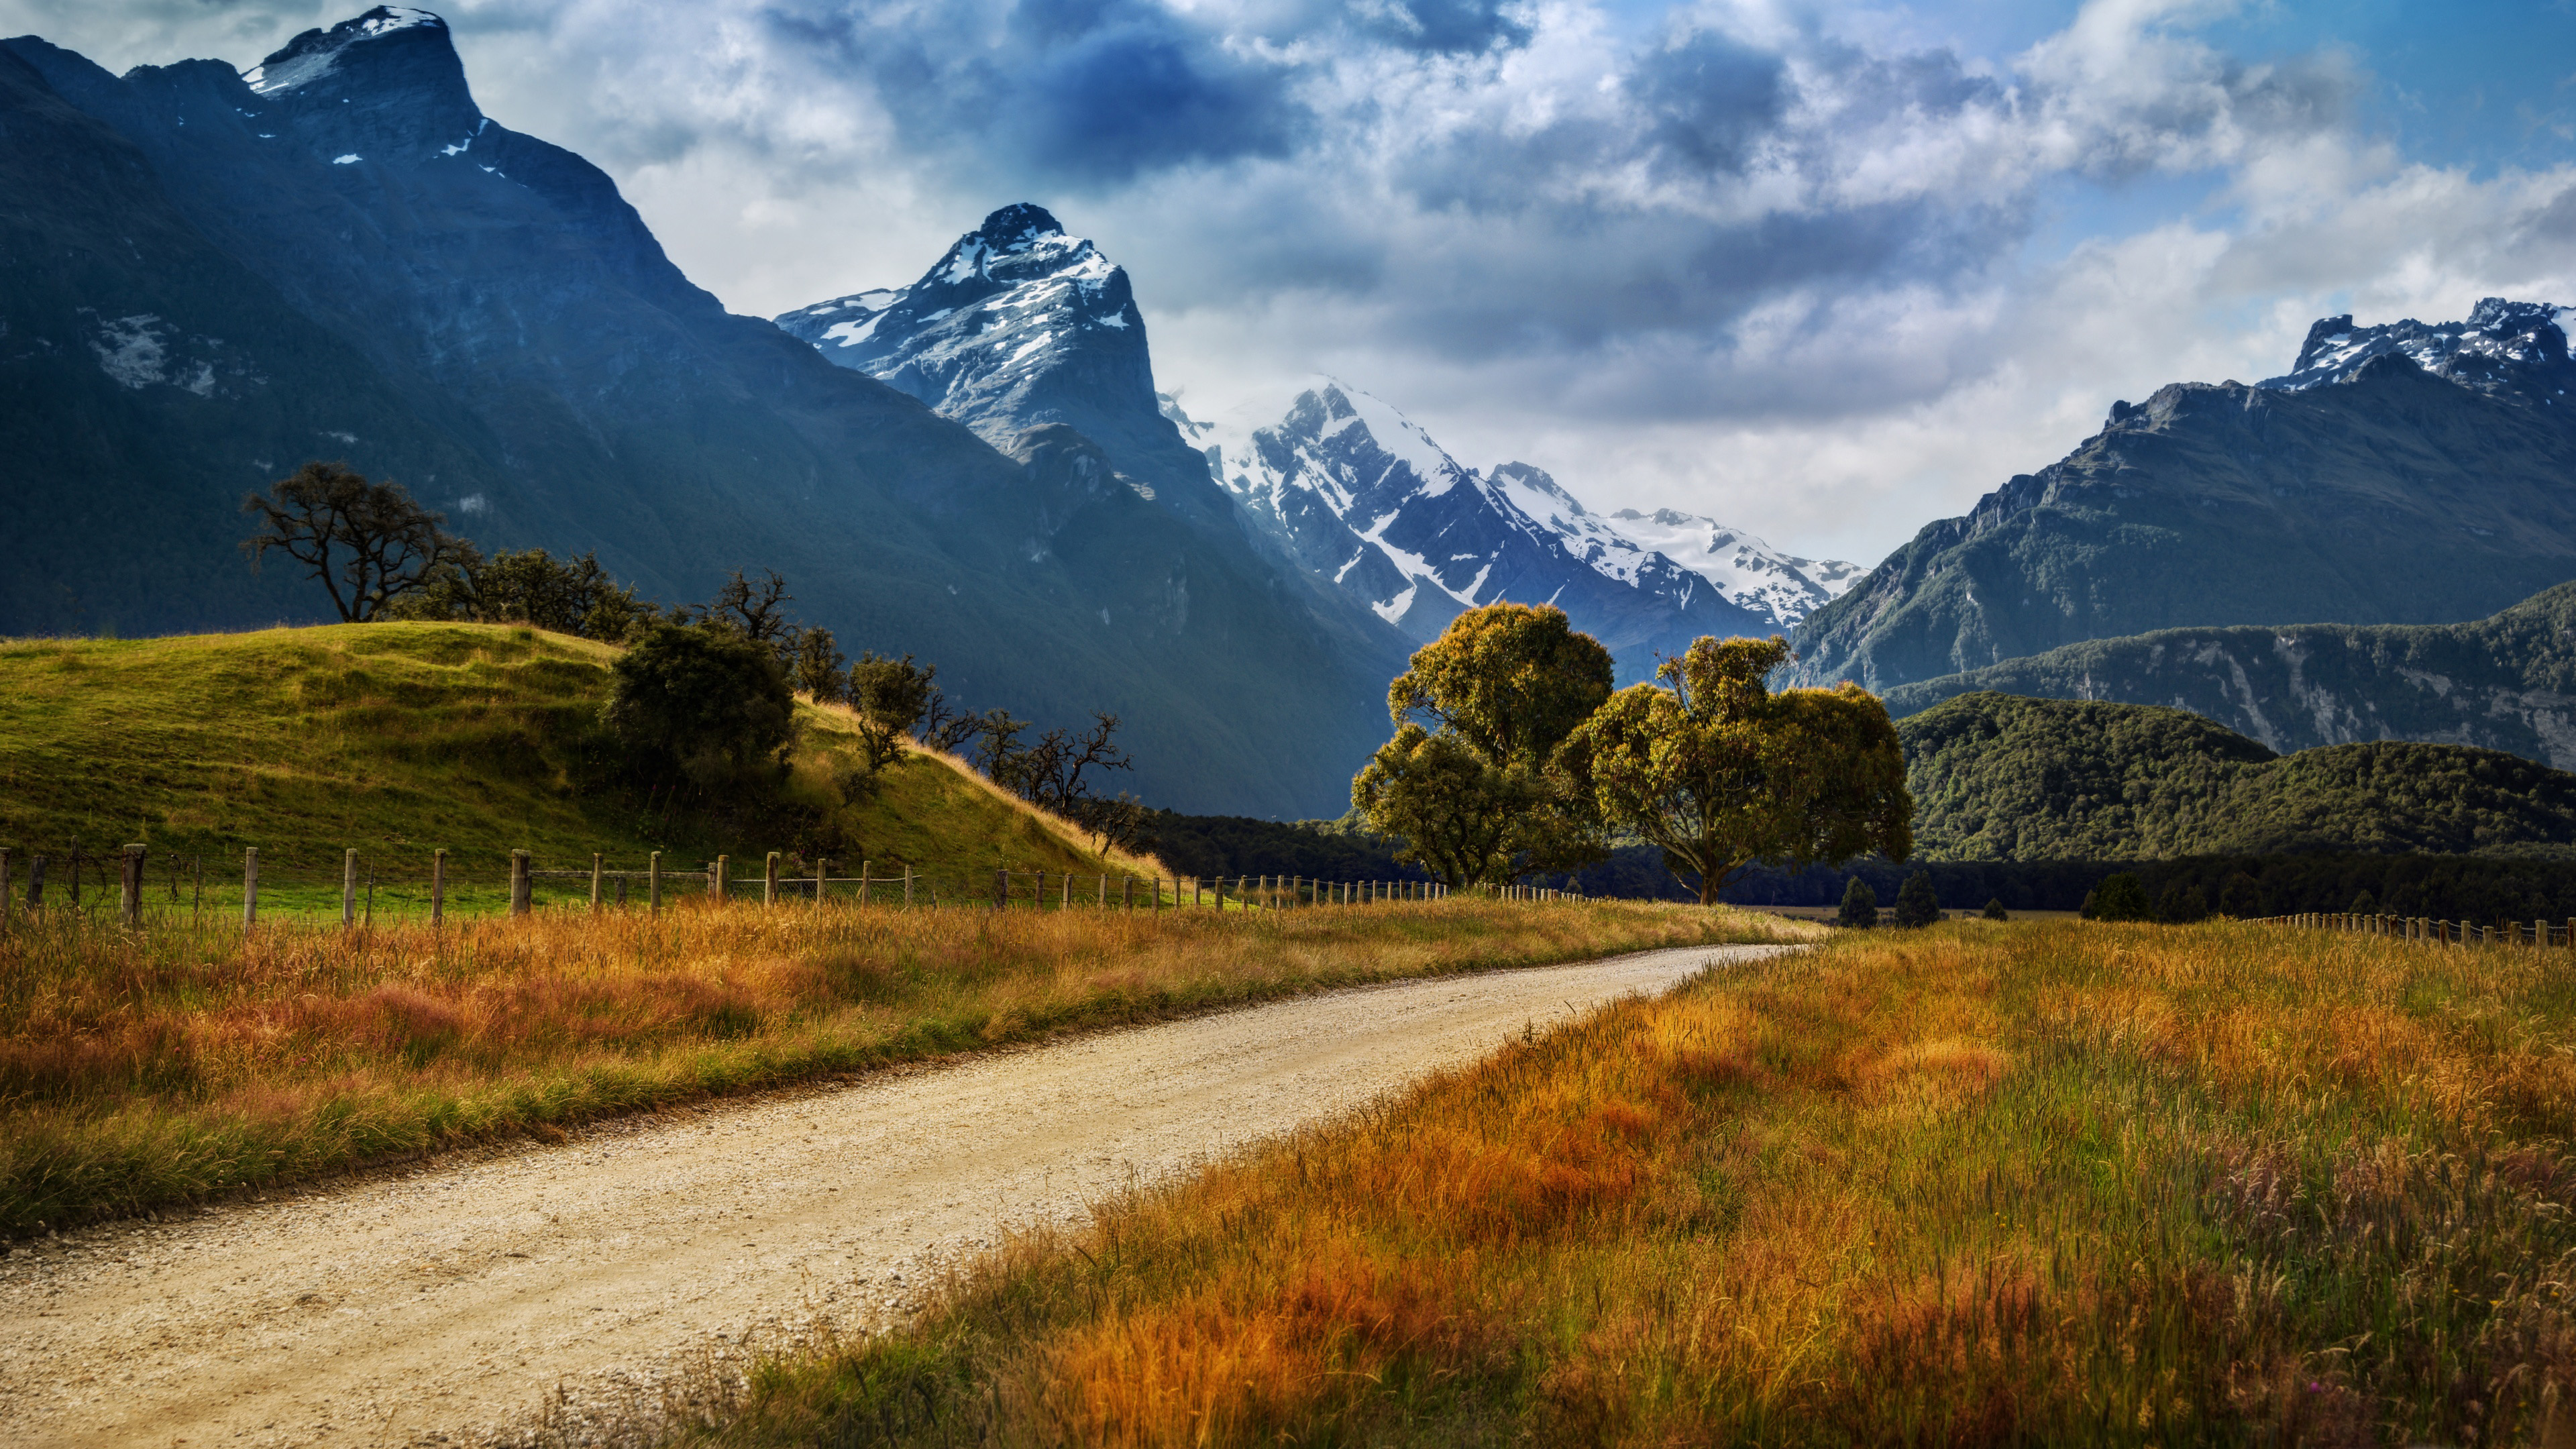 Landscape Of New Zealand Country Road Yellowed Grass, Rocky Peaks Of